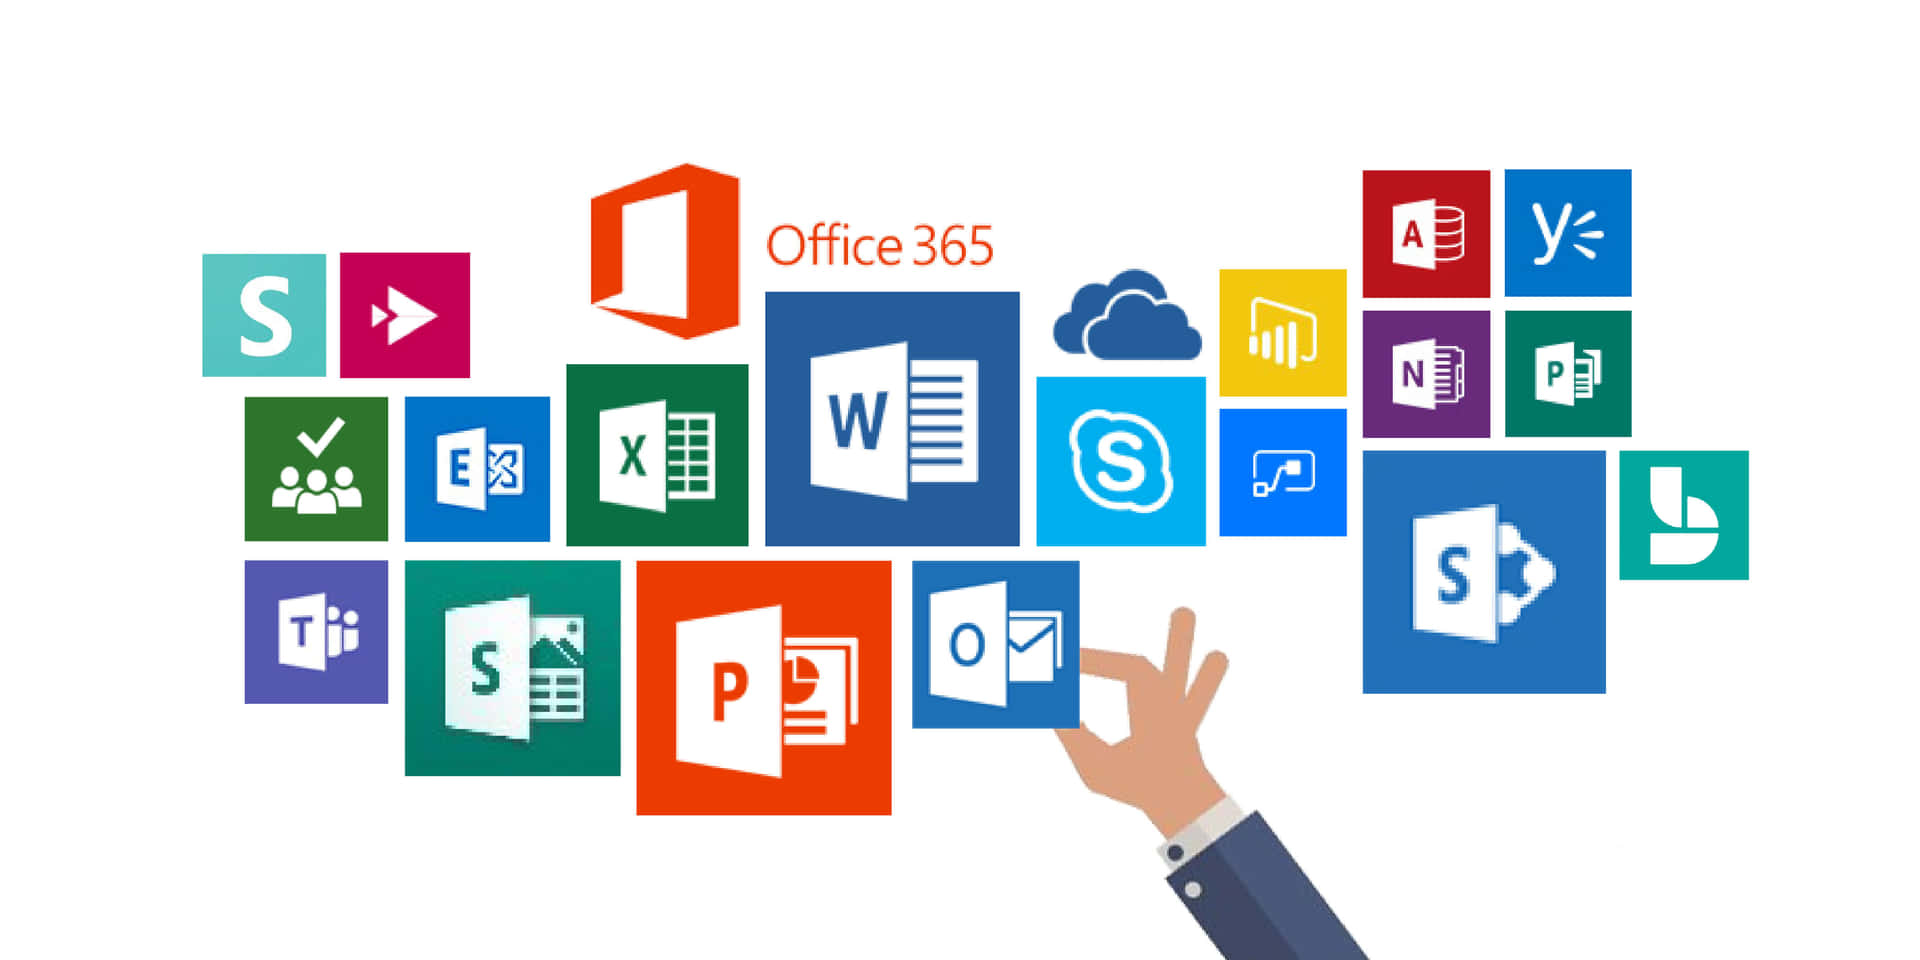 Get Ahead of the Curve with Microsoft Office 365